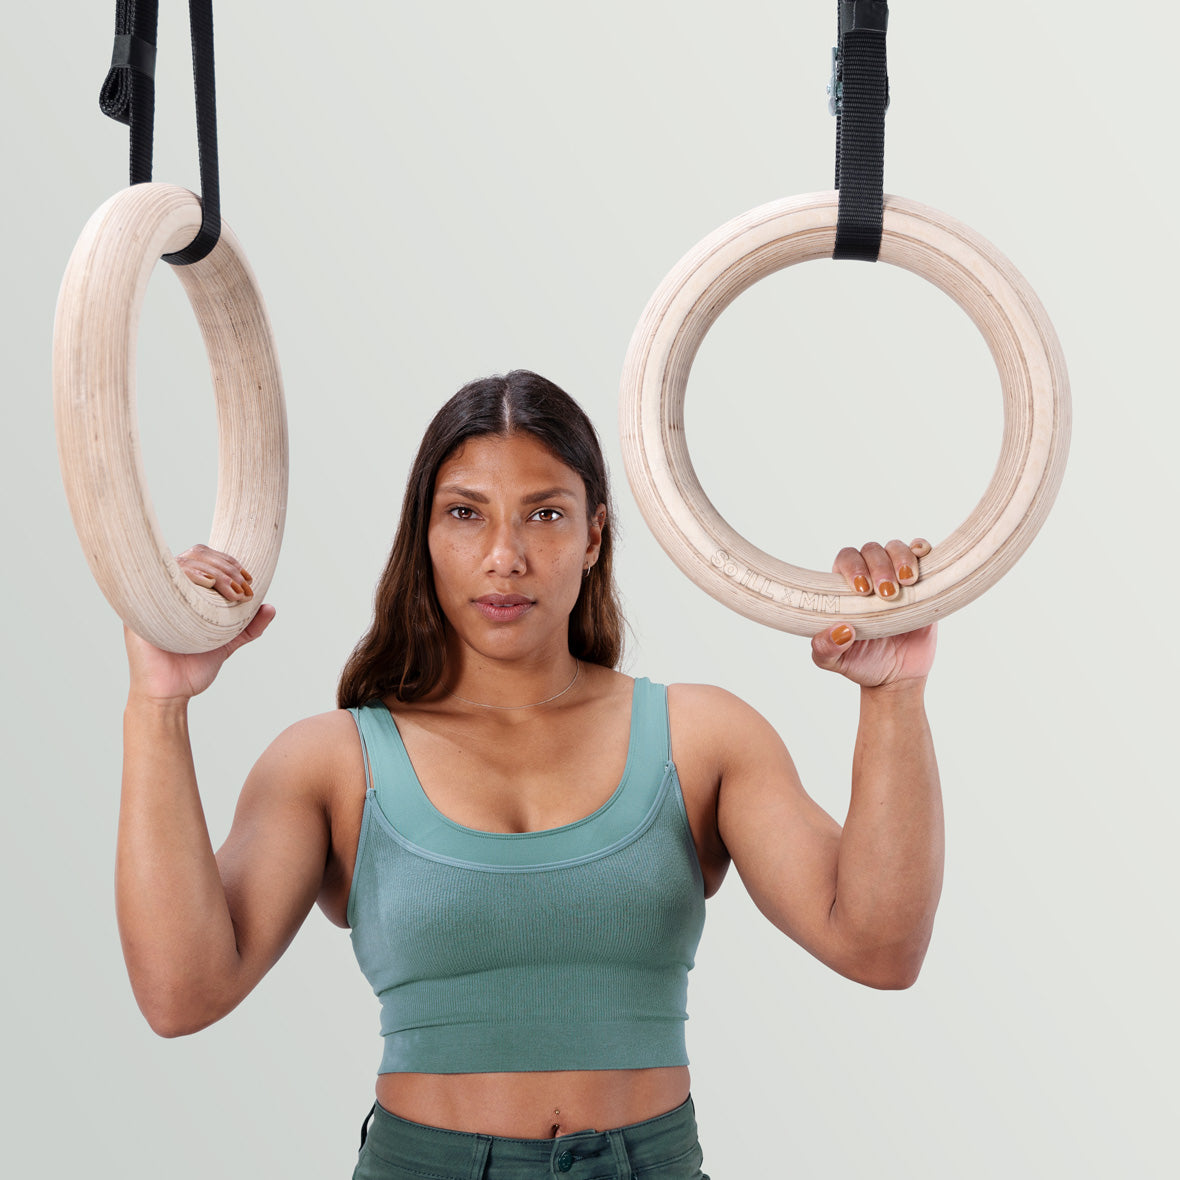 Meagan Martin hangs from her signature mega so ill wooden rings